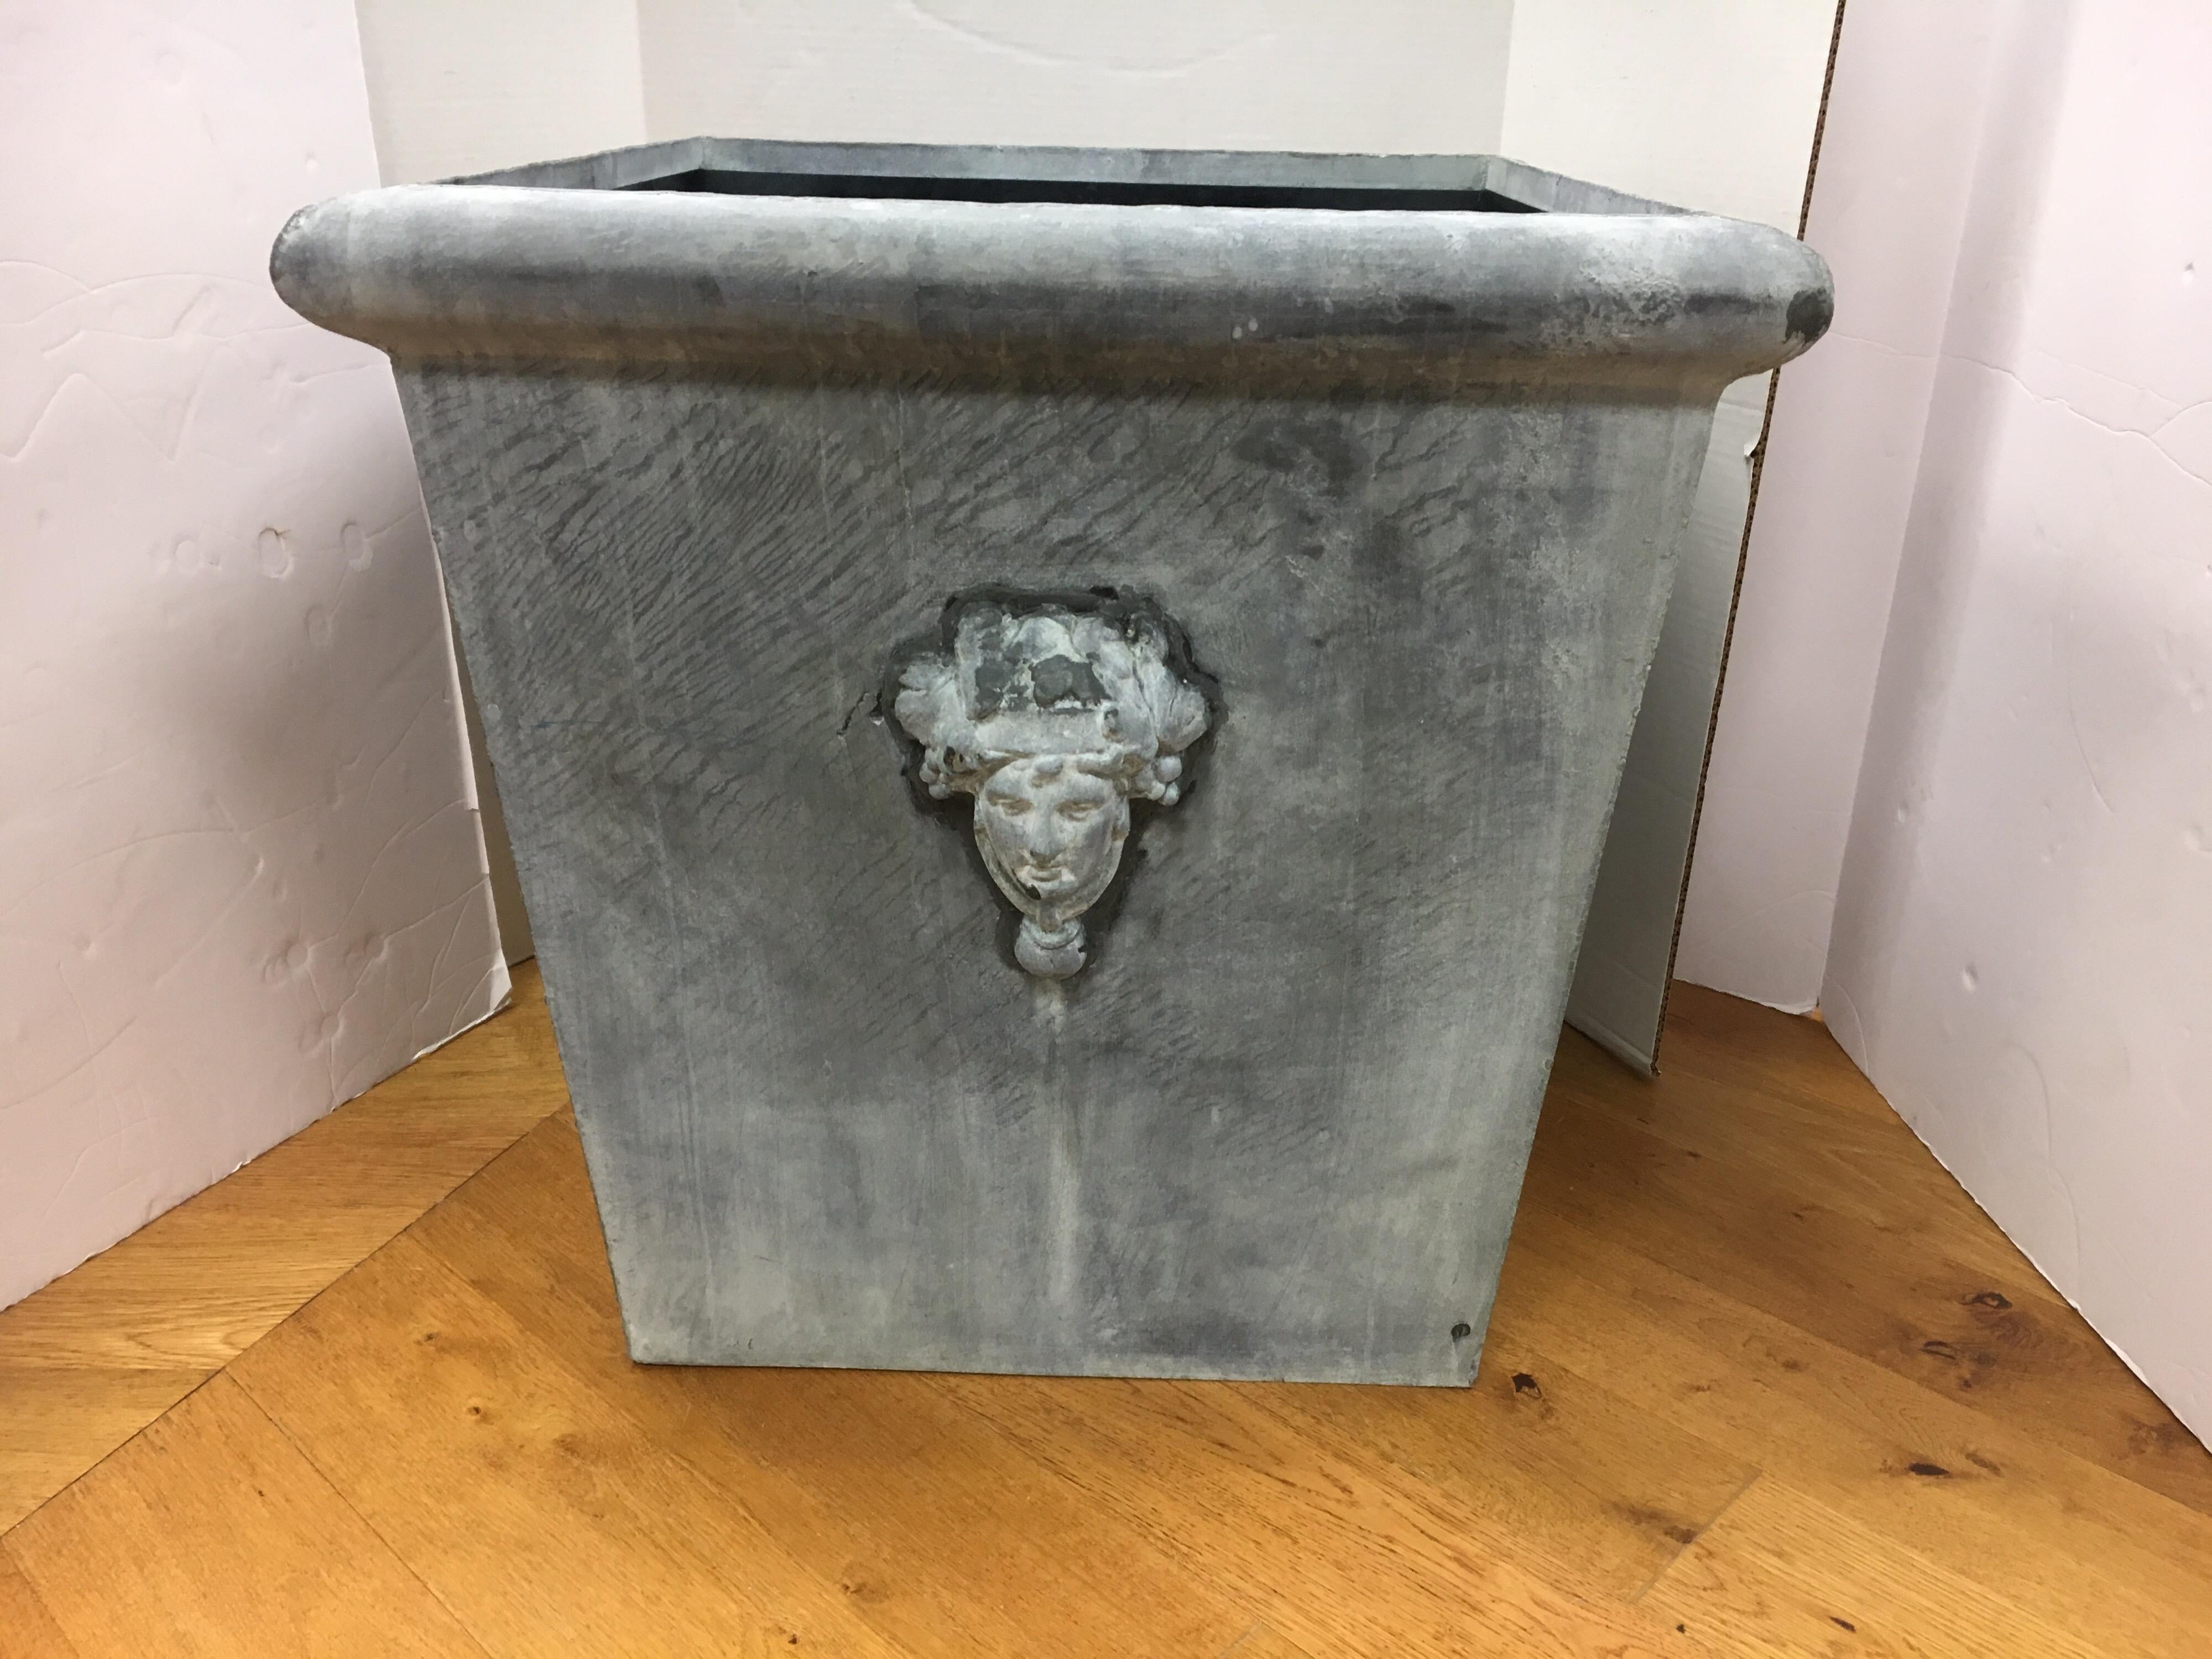 Large square zinc planter with Greek figural head on one side. Has pre-drilled hole for drainage. Very unusual.